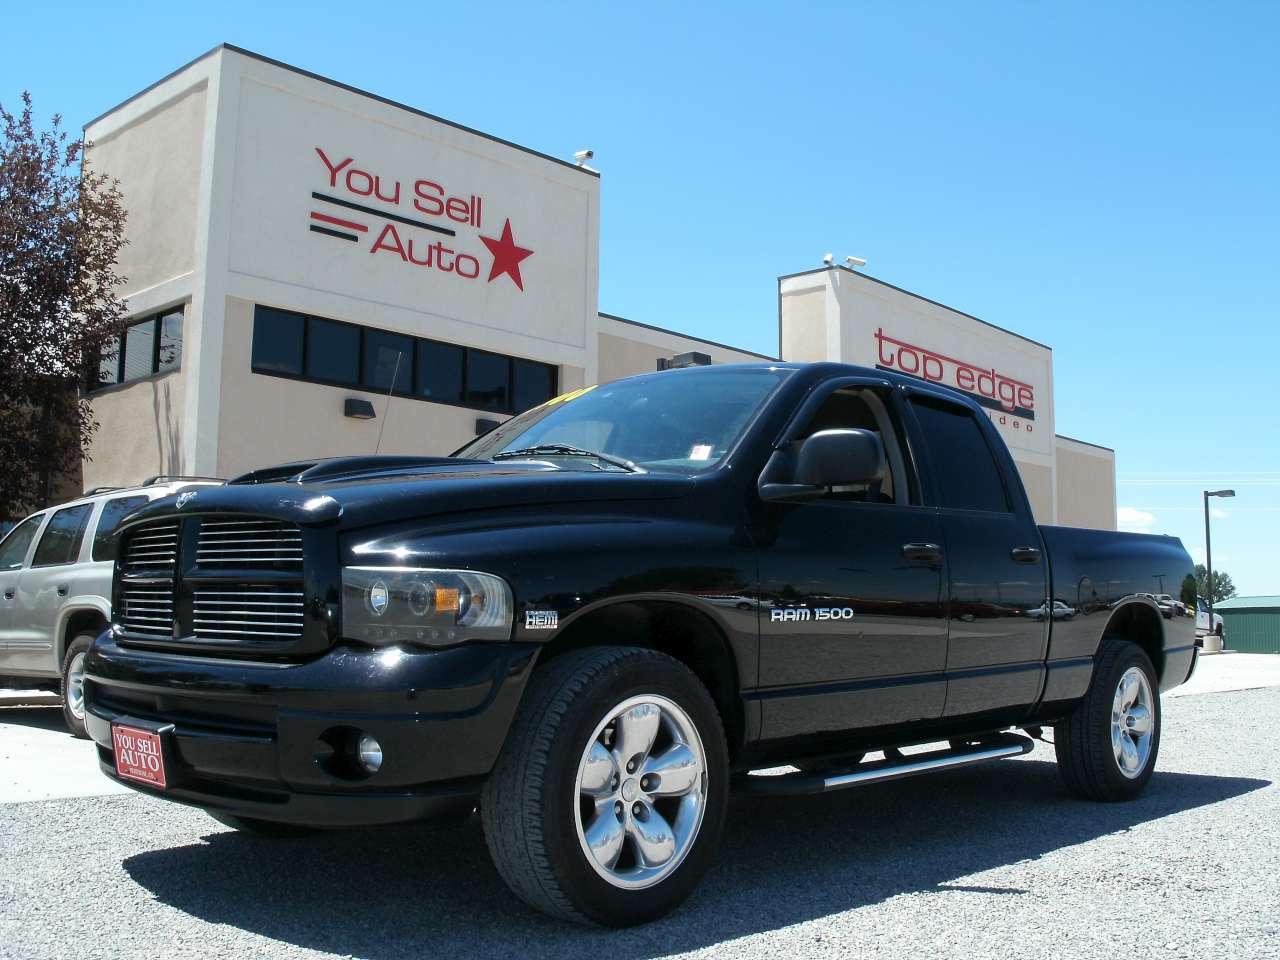 You Sell Auto: 2003 Dodge Ram 1500 SLT Limited Edition @ $11,999